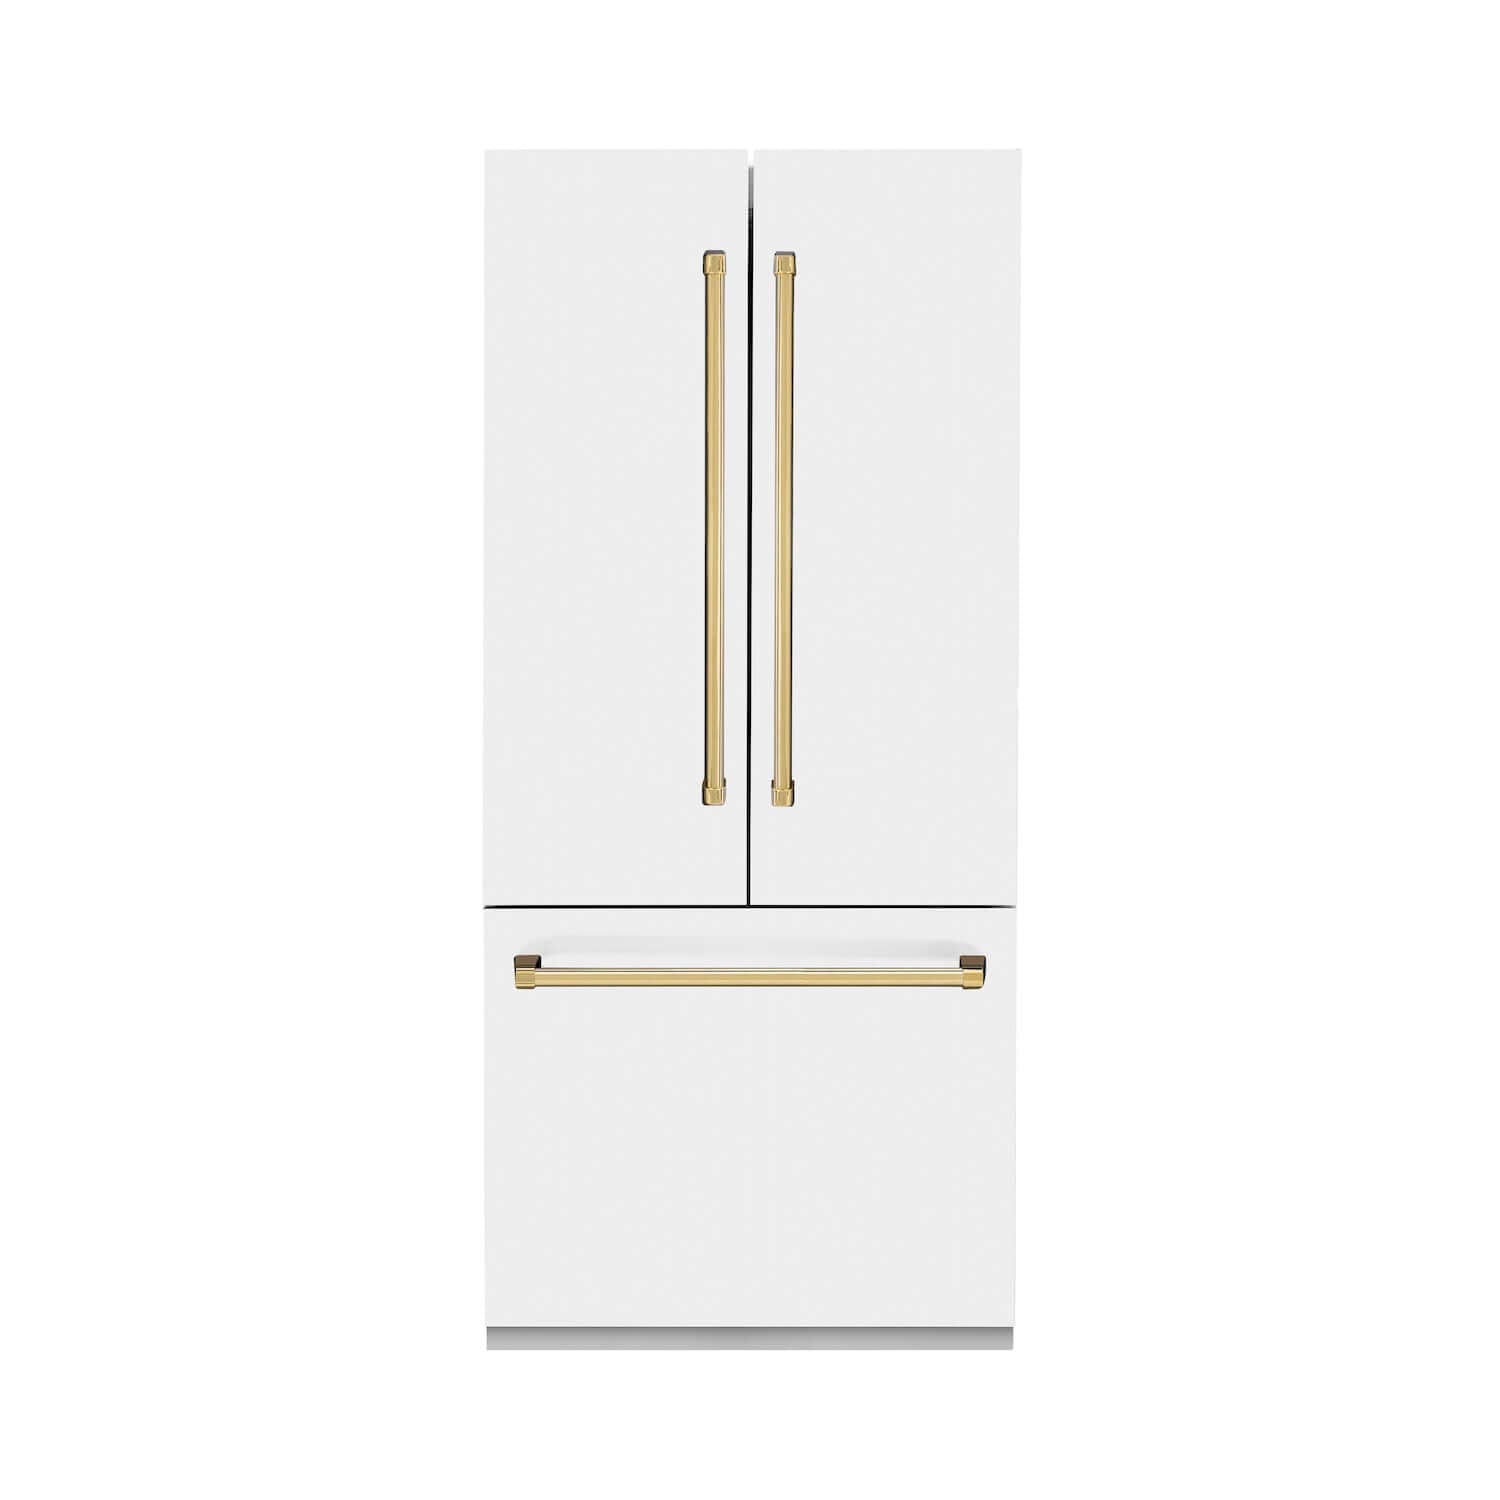 ZLINE Autograph Edition 36" Built-in French Door White Matte Refrigerator with Polished Gold Accents front.